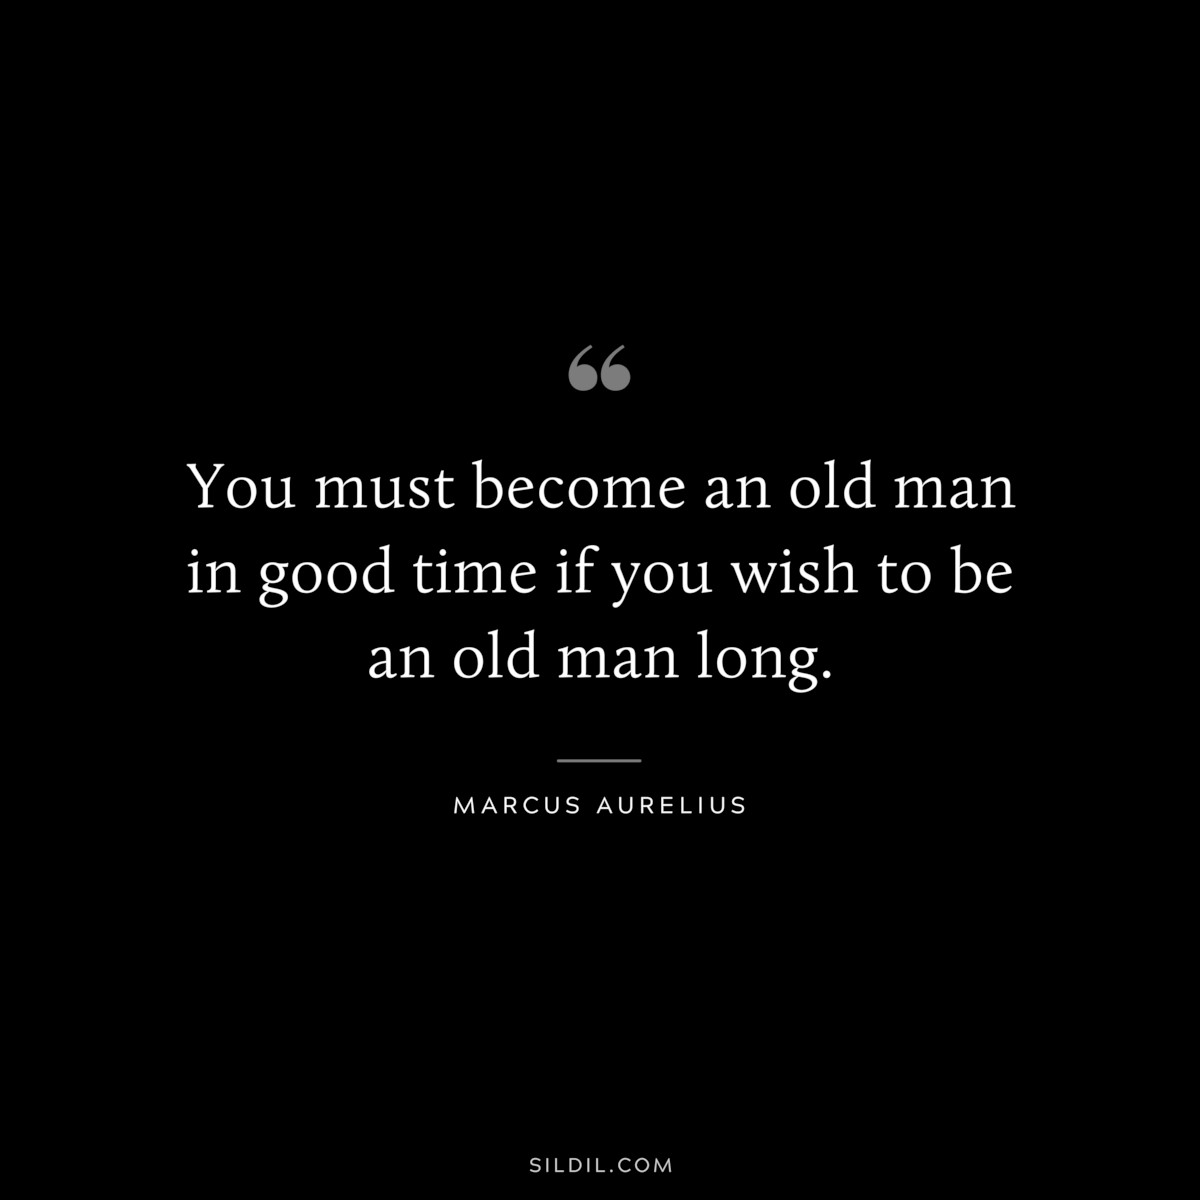 You must become an old man in good time if you wish to be an old man long. ― Marcus Aurelius